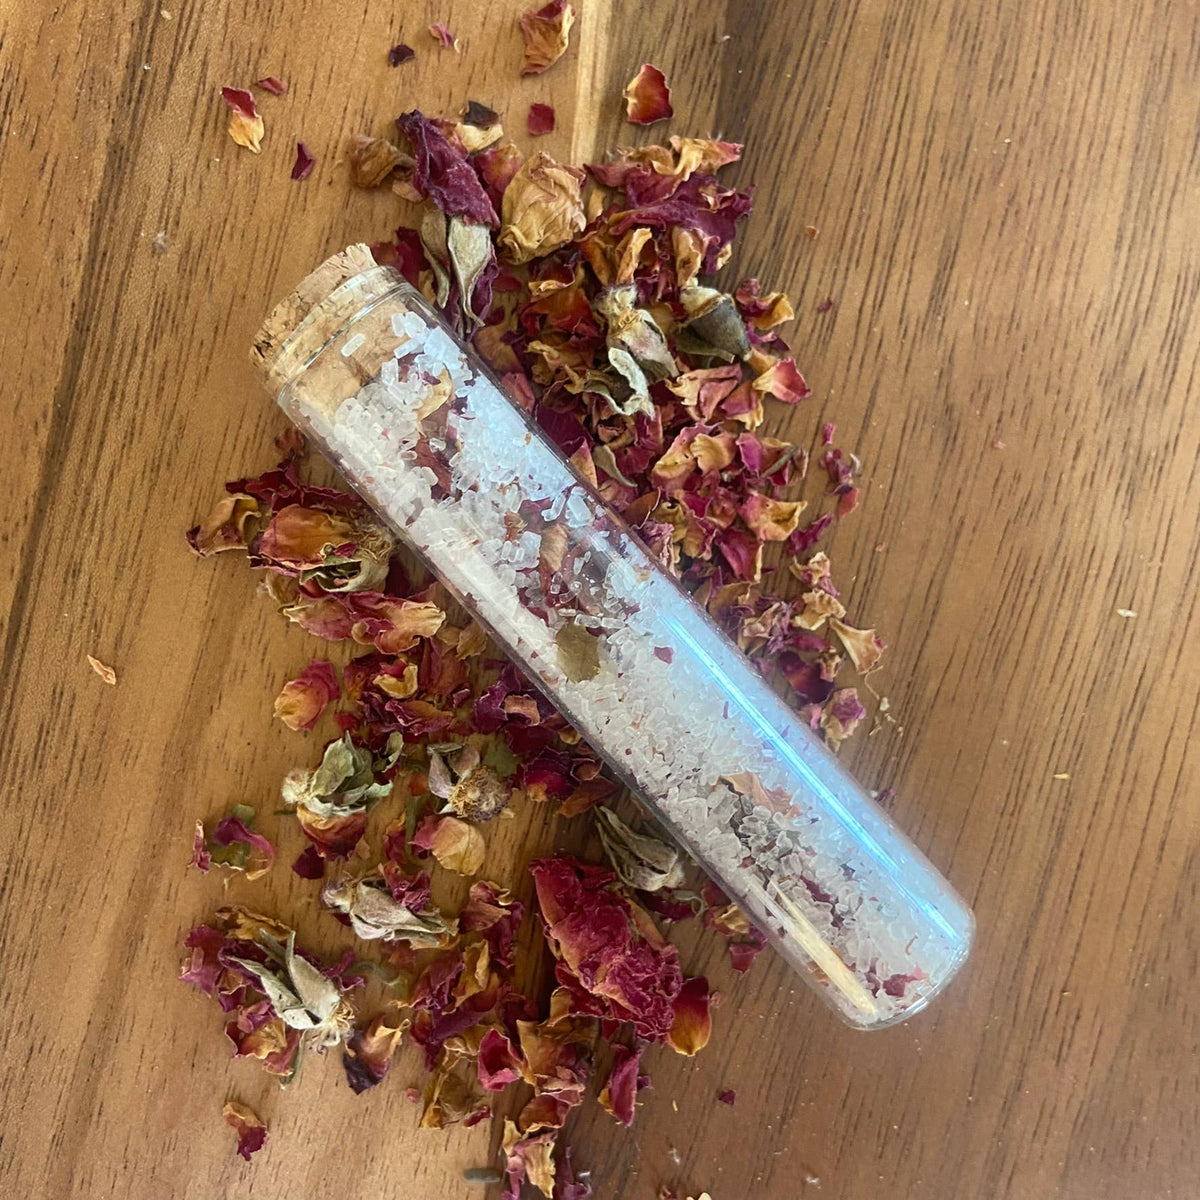 Herbal Bath Salts Test Tubes - Made With Dried Rose Petals